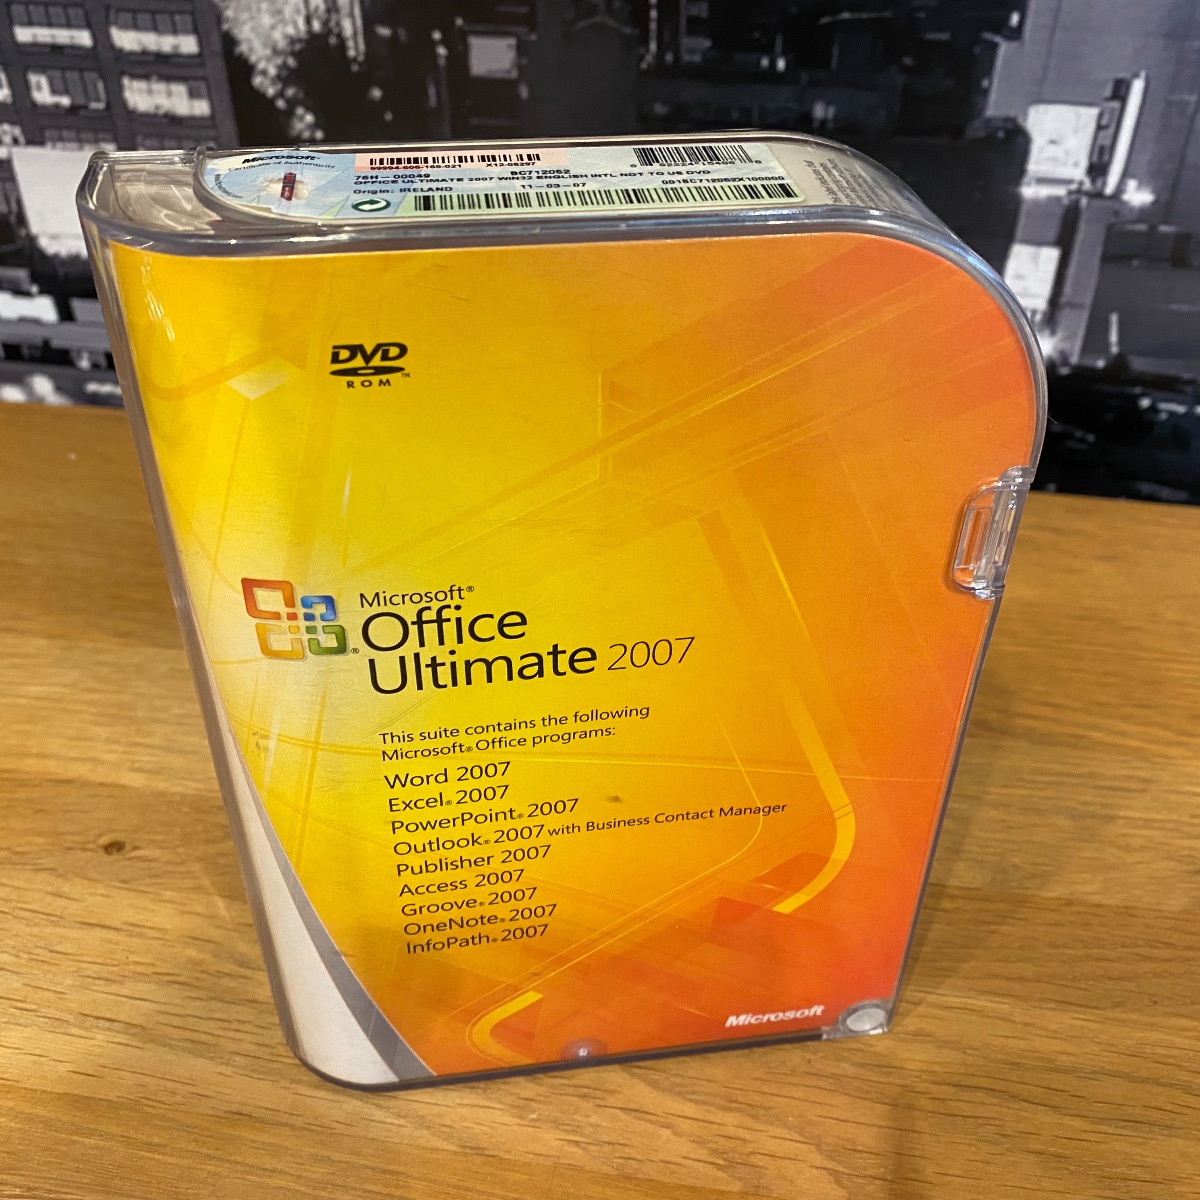 Microsoft Office 2007 Ultimate Windows 11 10 8 7 Word Excel PowerPoint Outlook 76H-00049 882224154888 (Previously Used)